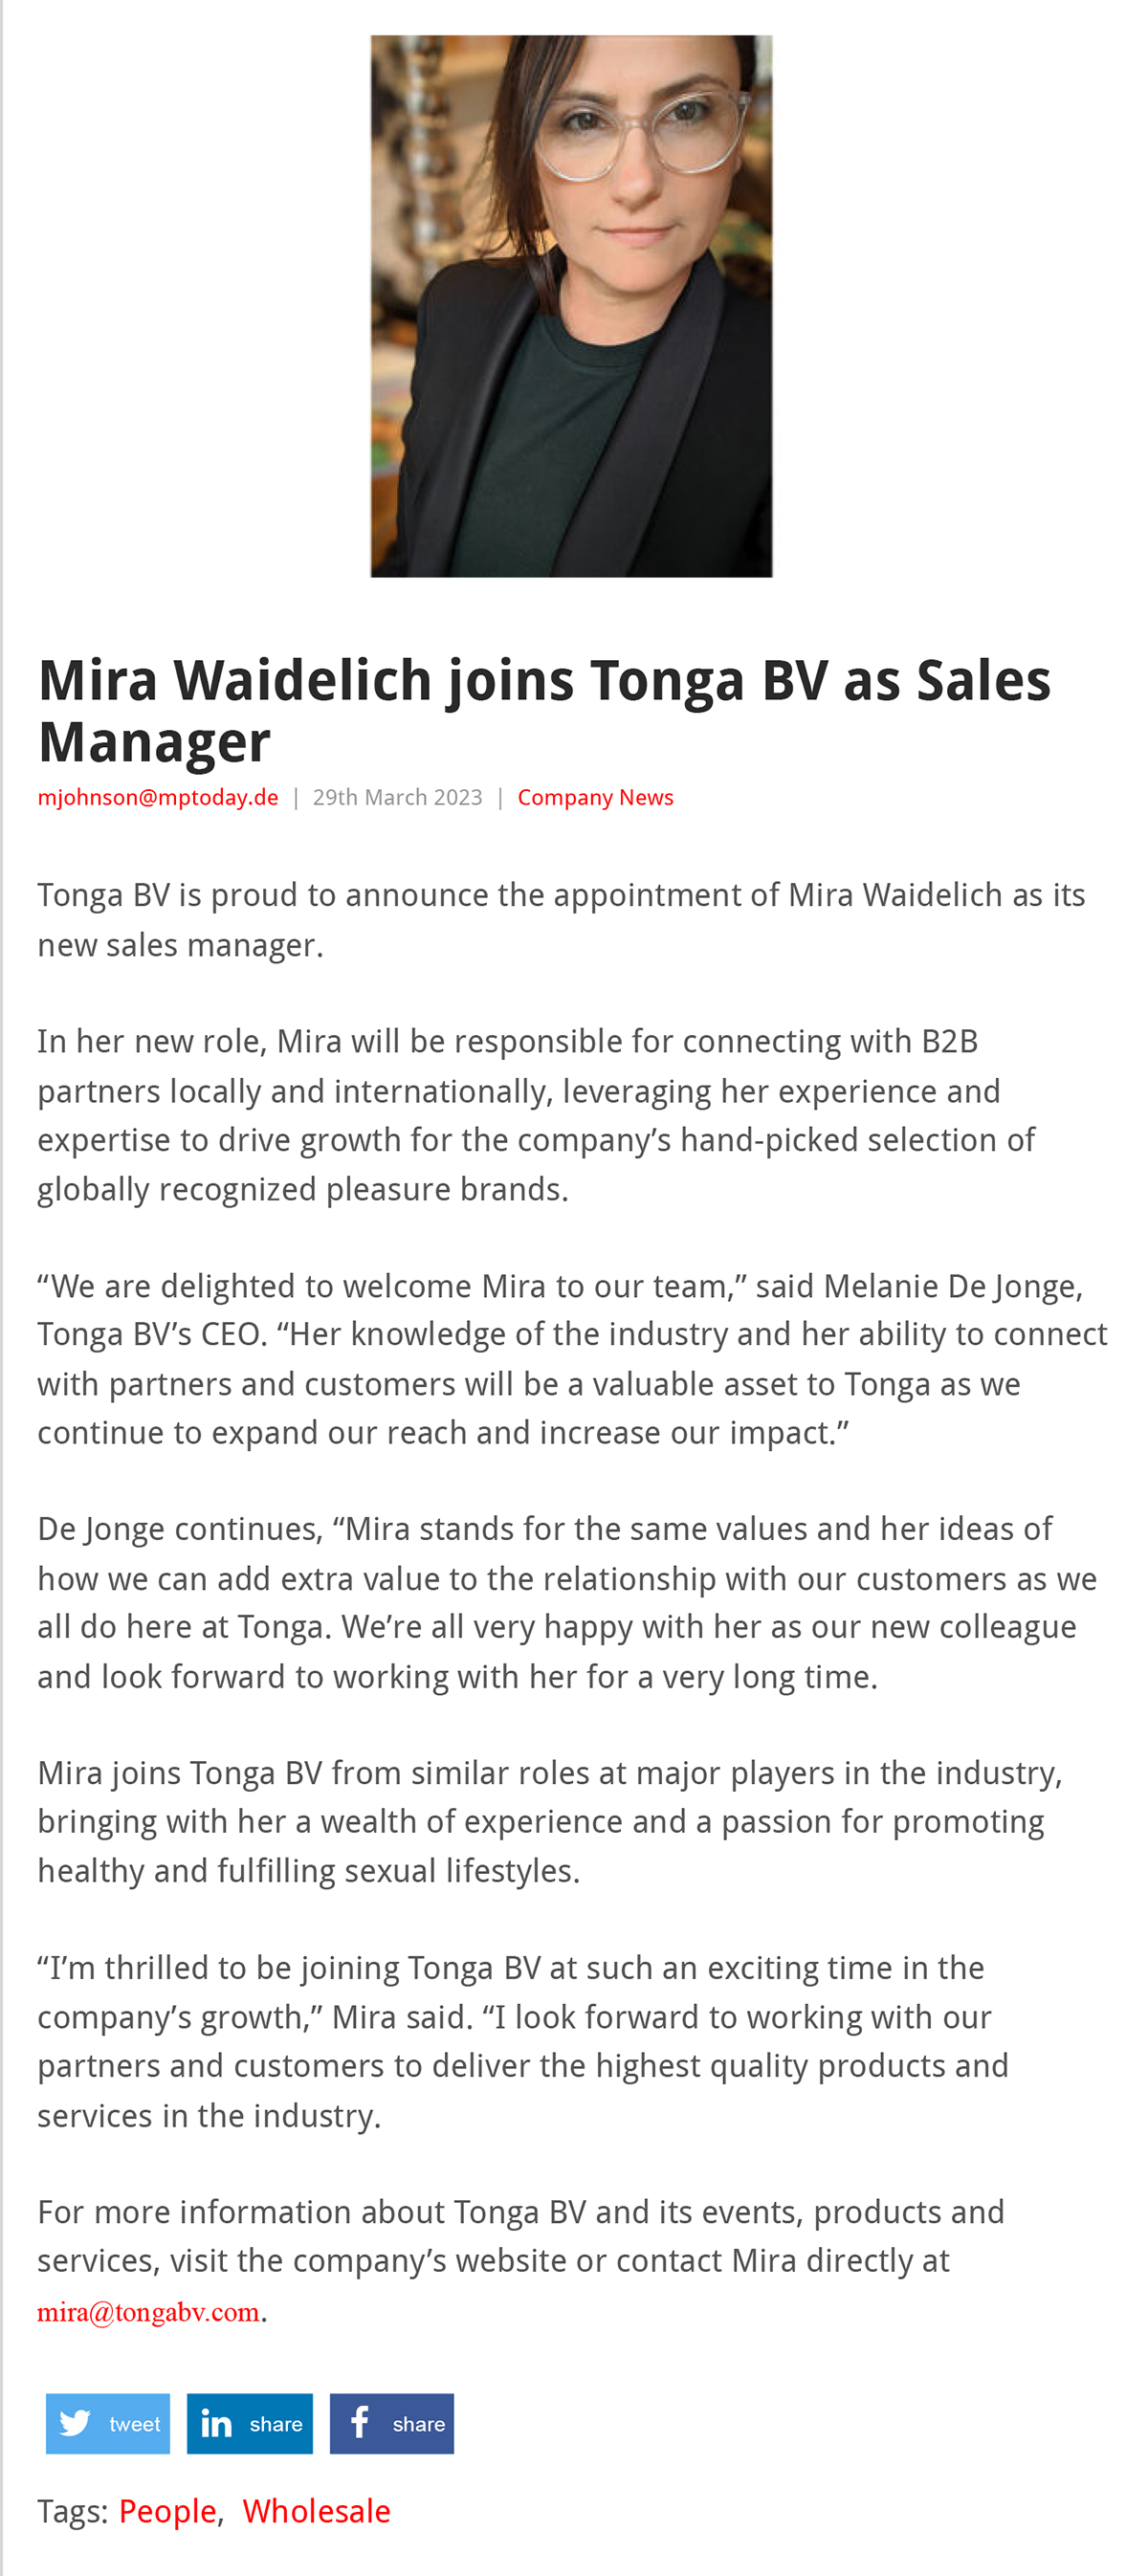 2023-03 EAN Online - Mira Waidelich joins Tonga BV as Sales Manager